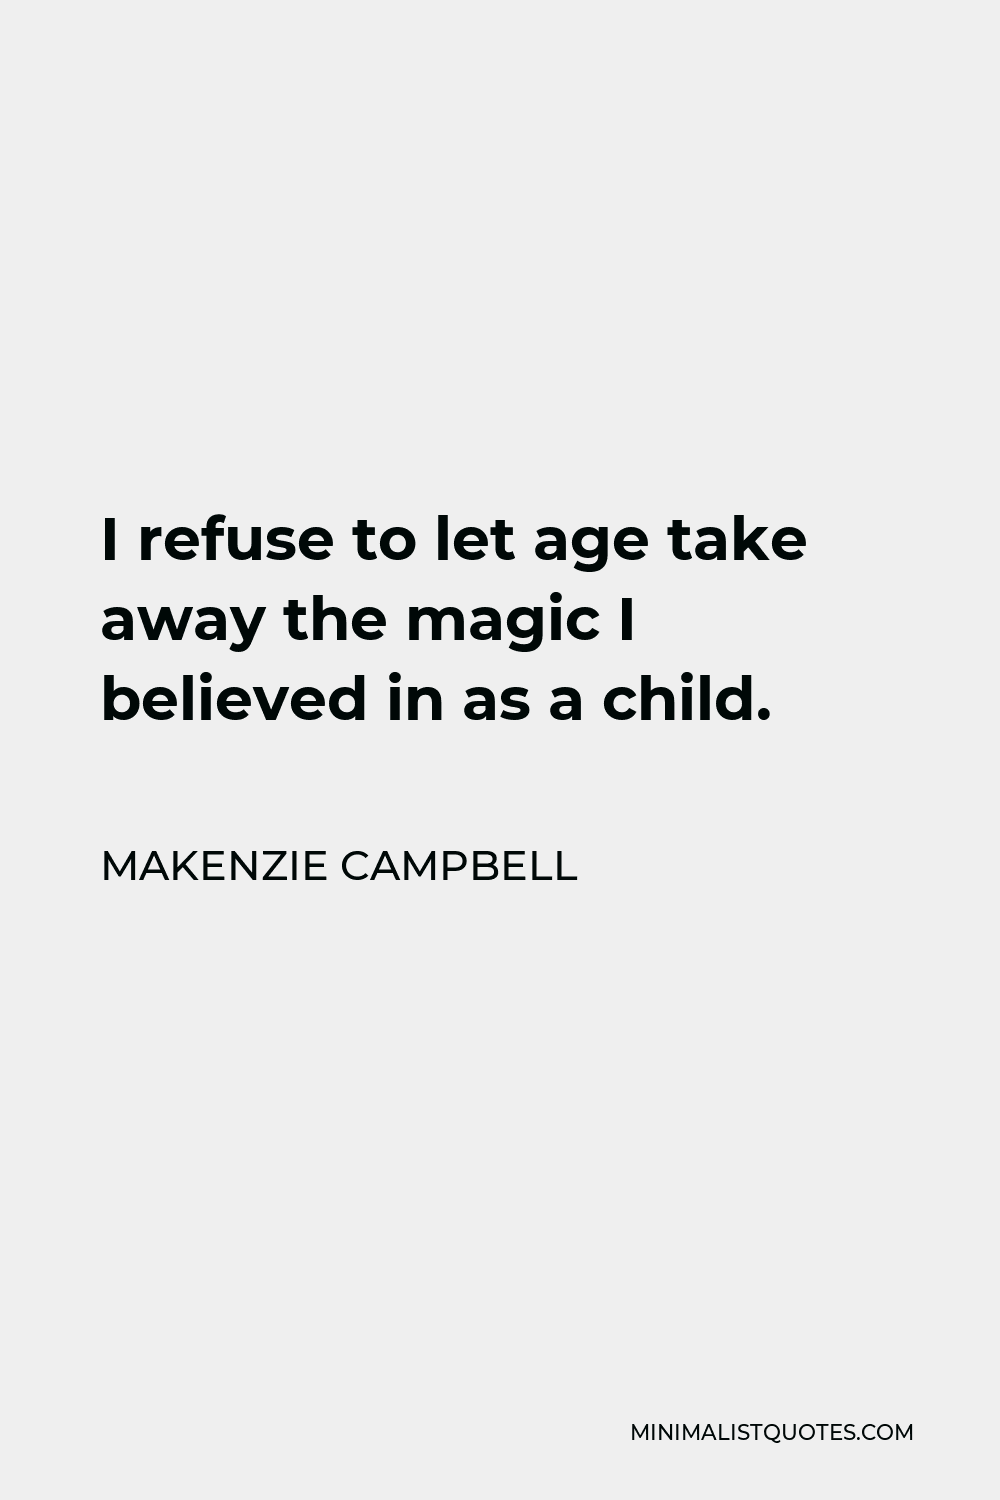 Makenzie Campbell Quote - I refuse to let age take away the magic I believed in as a child.